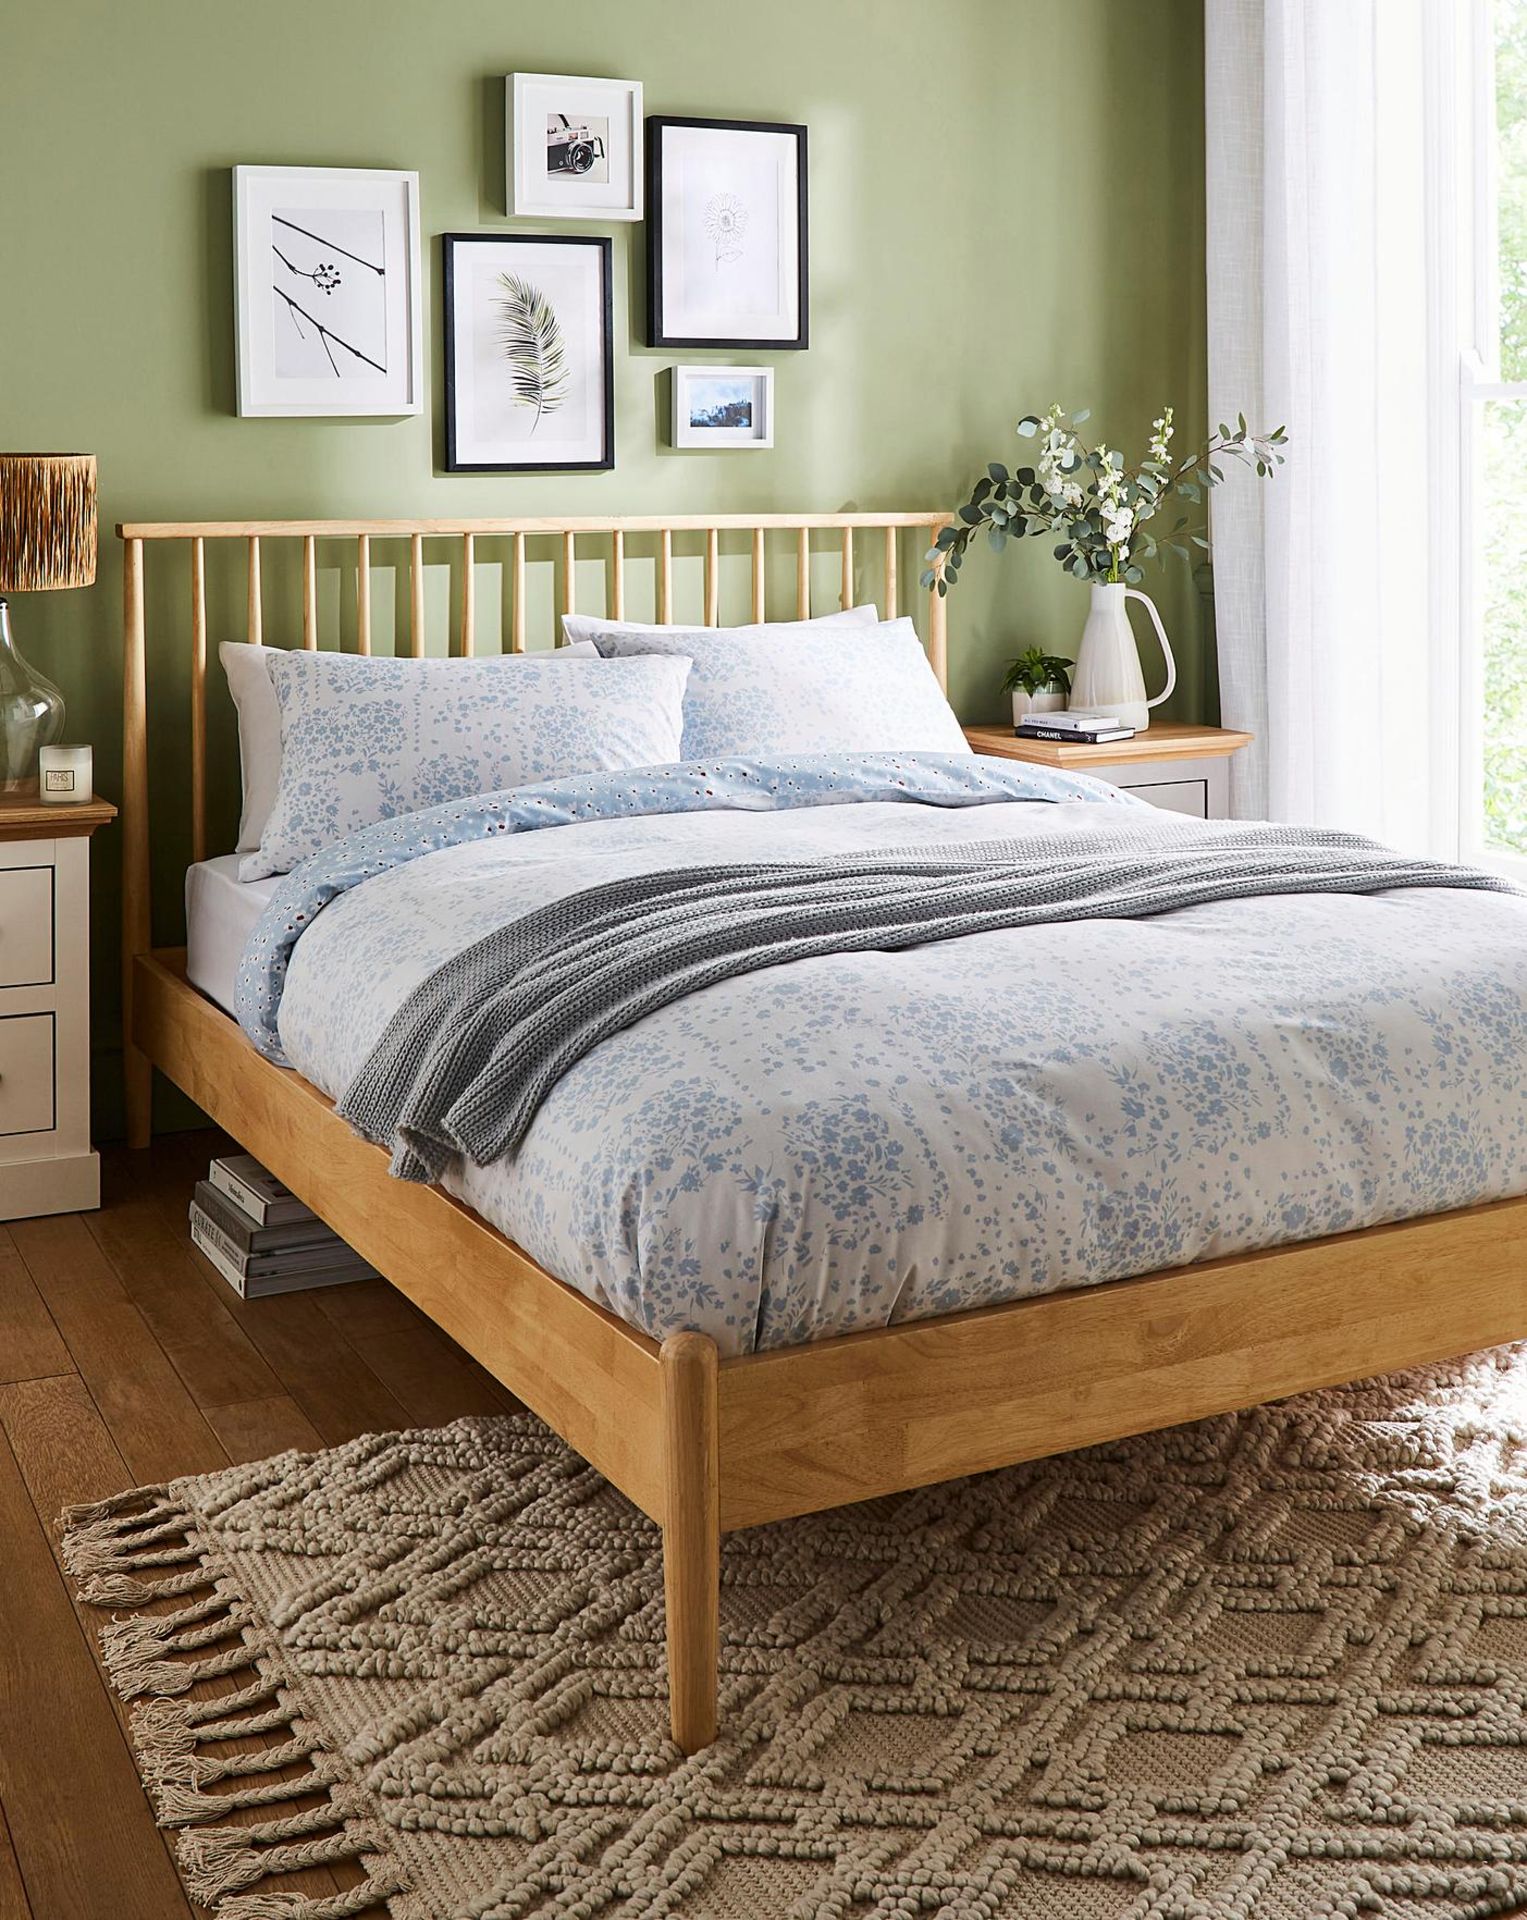 NEW & BOXED JULIPA Erika Wooden Spindle KINGSIZE Bed Frame. LIGHT WOOD. RRP £749. EACH. Part of